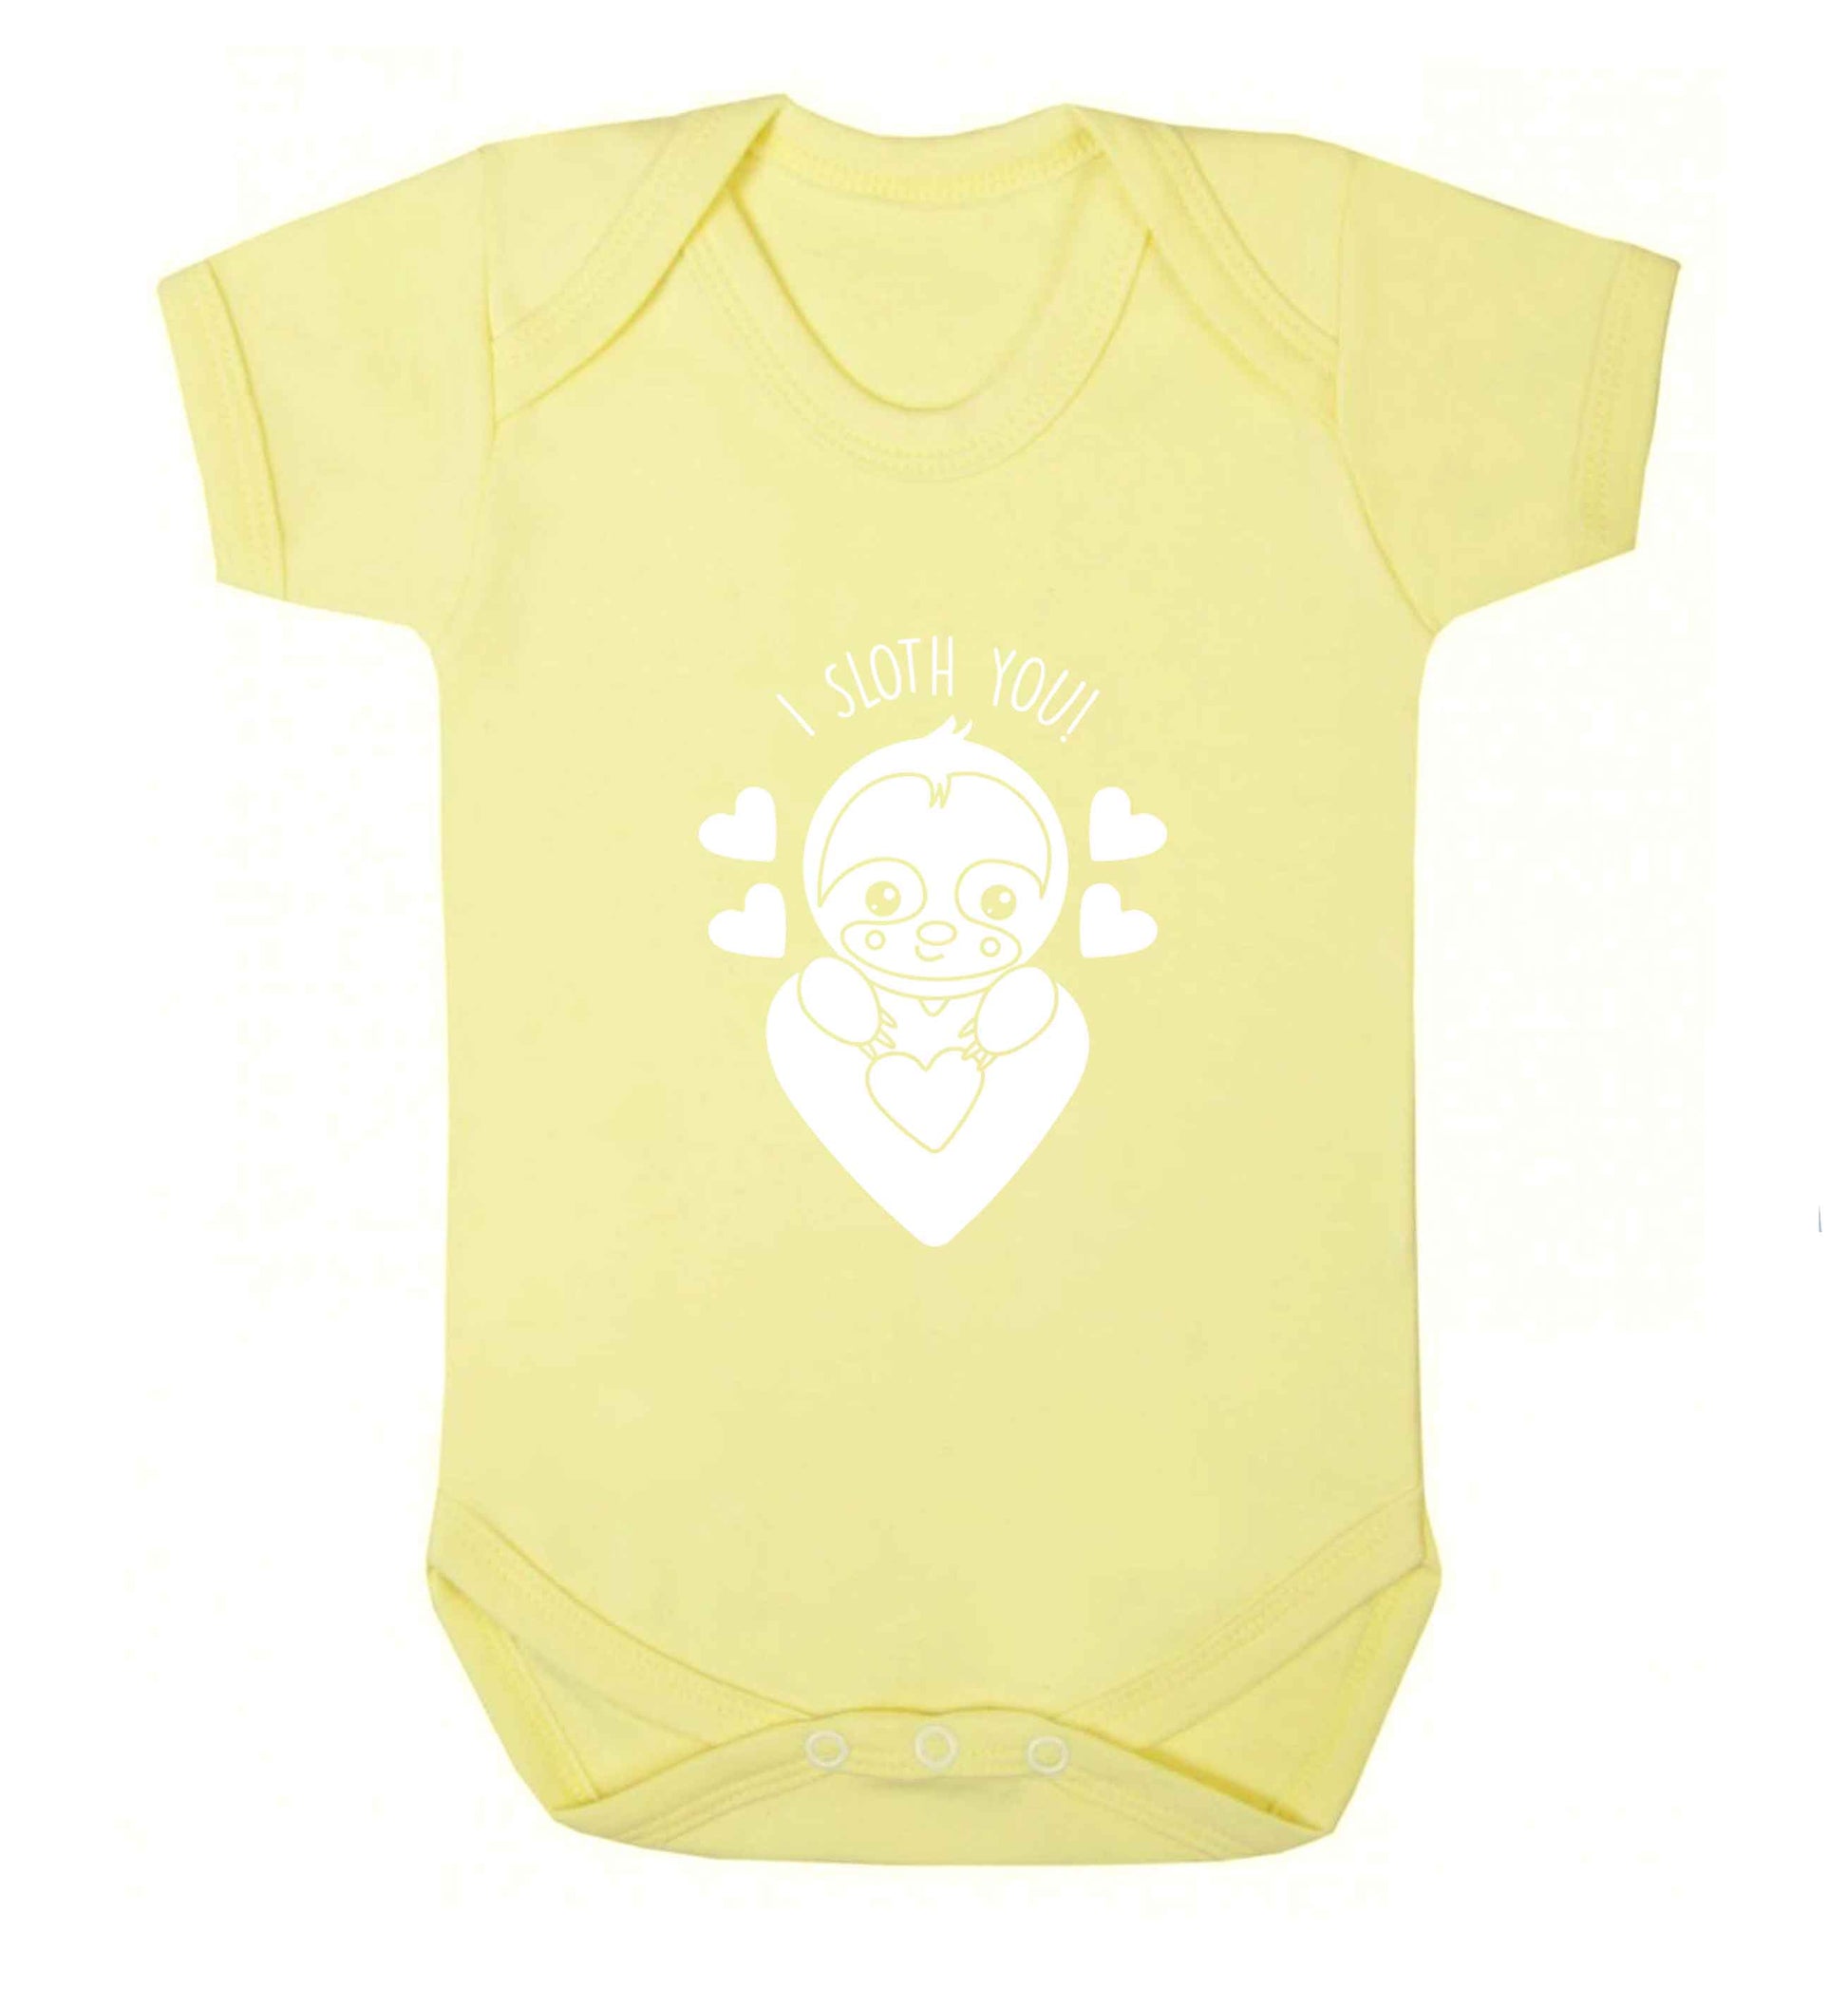 I sloth you baby vest pale yellow 18-24 months